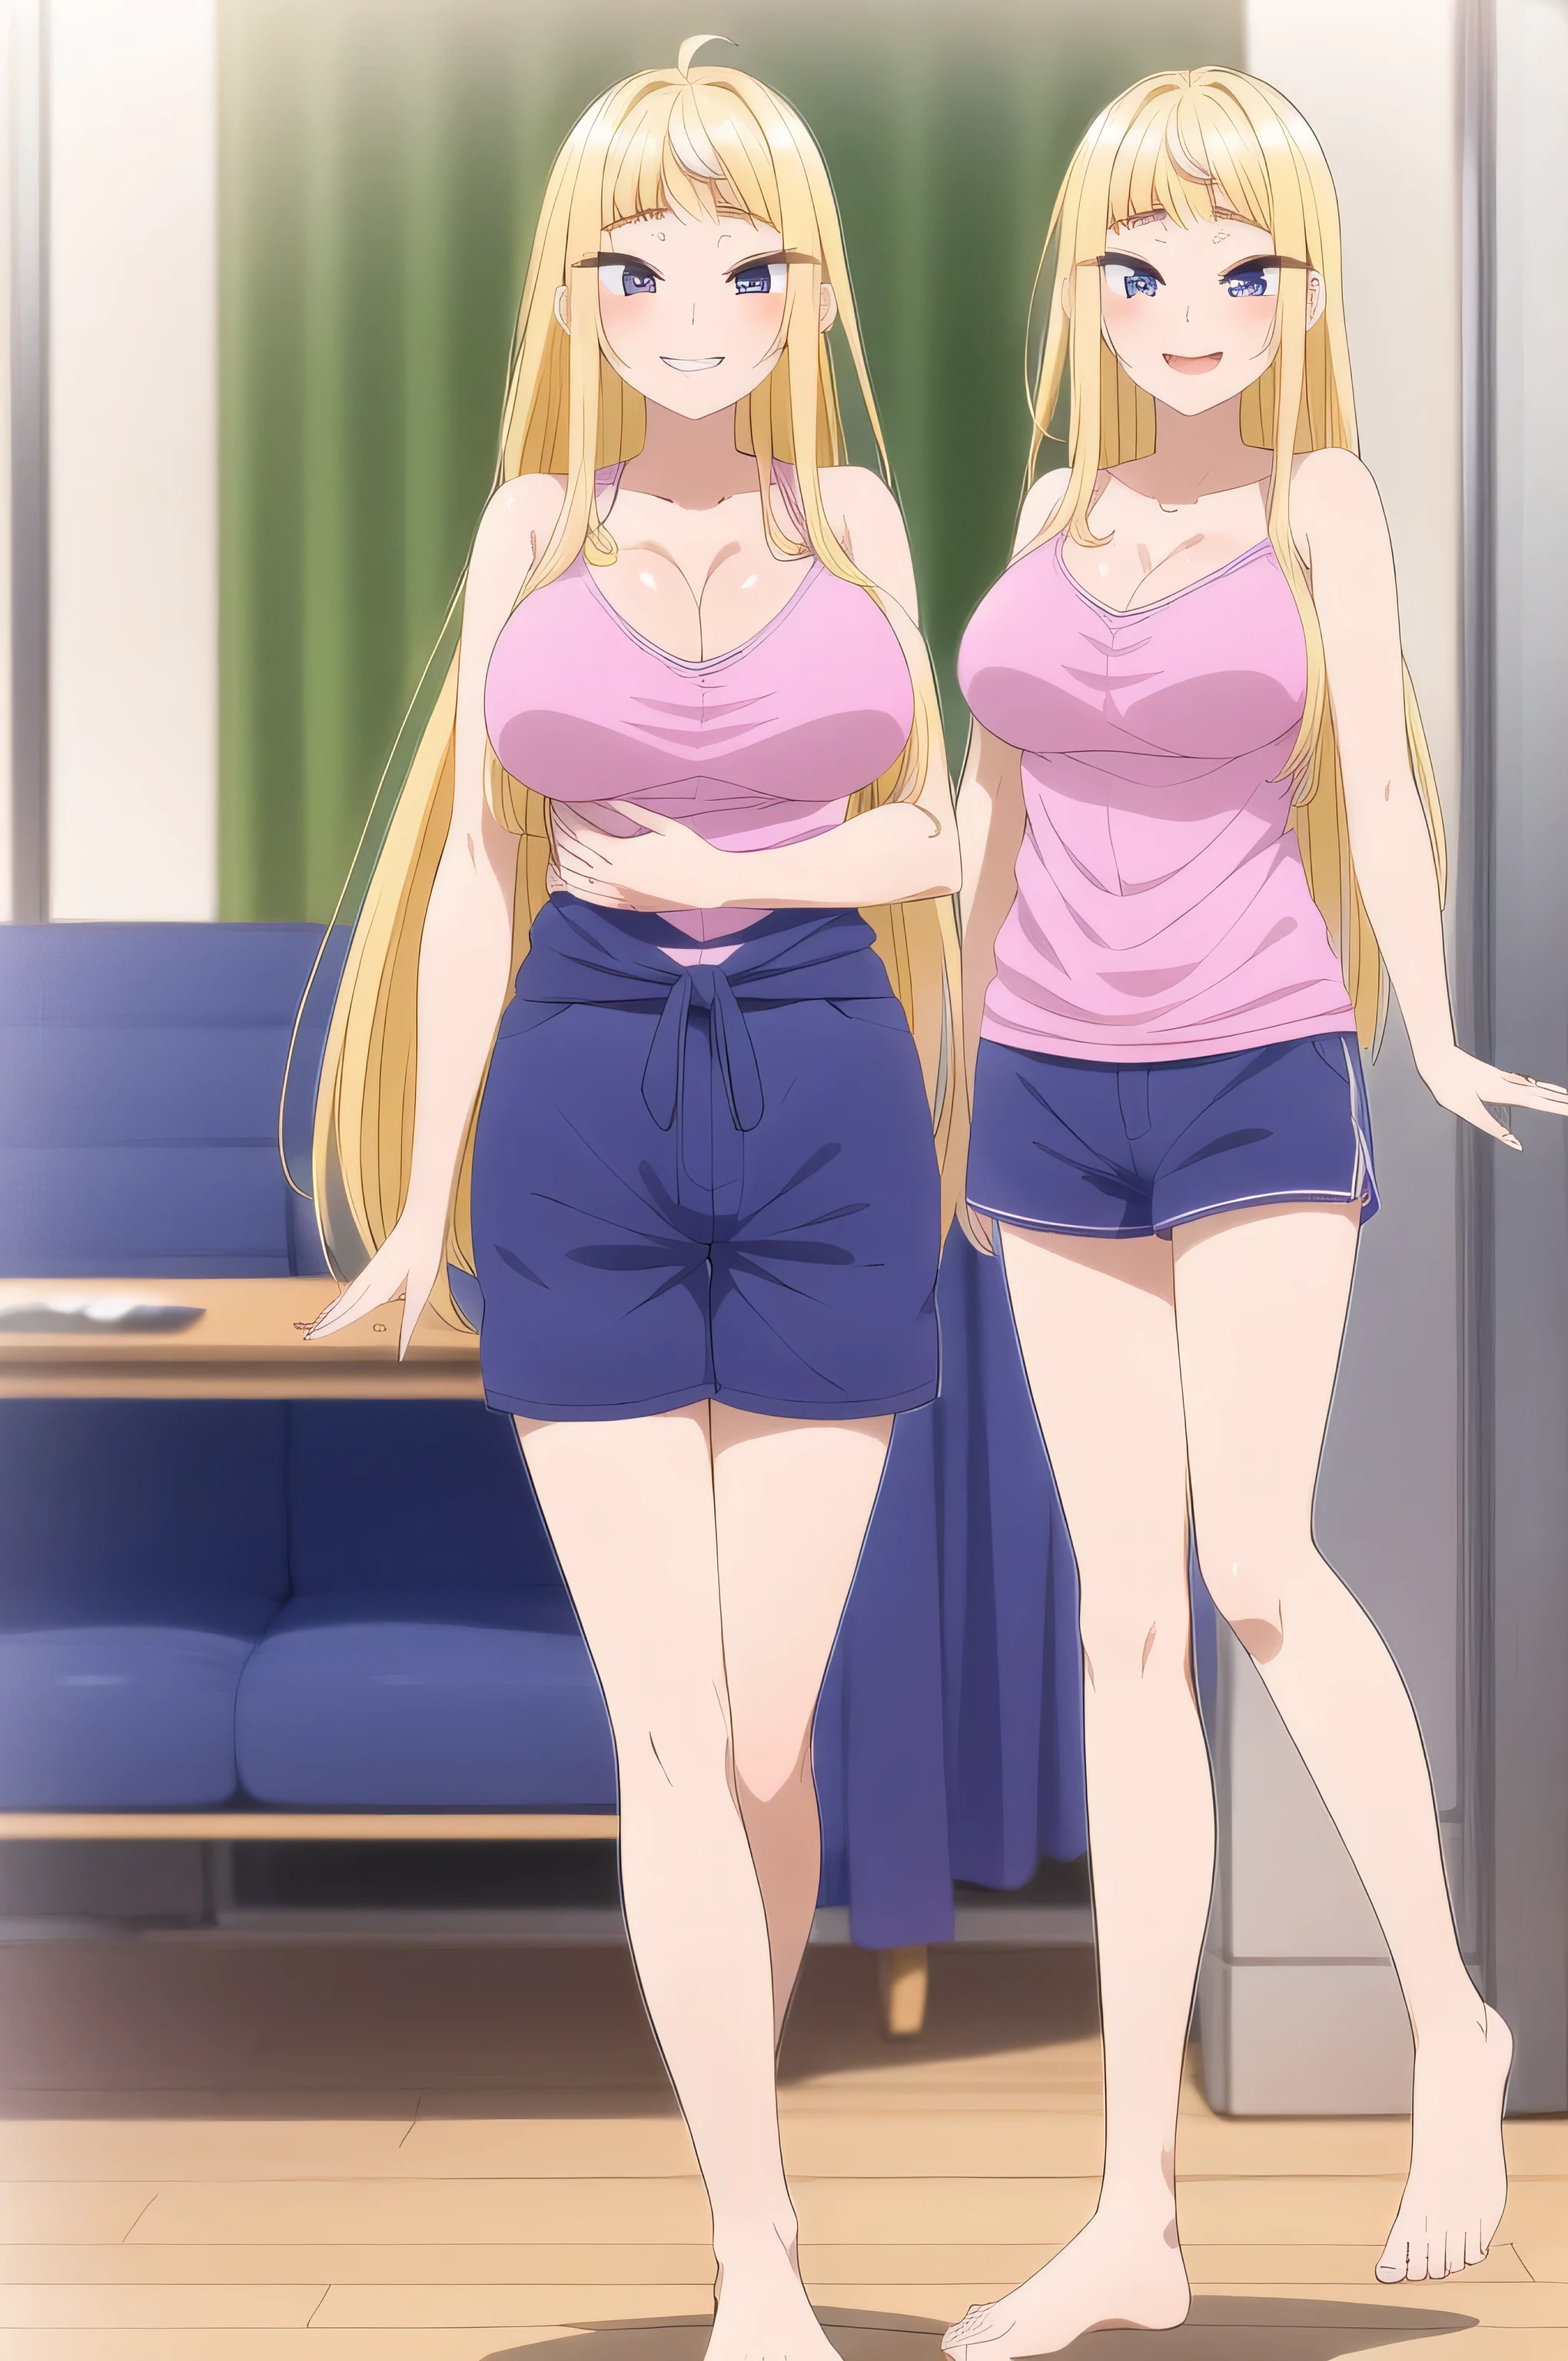 software, (masterpiece:1.4), (highest quality), (ultra High resolution), (fine grain:1.3), highest quality, High resolution, Perfect Anatomy, indoor, (fuyuki_Minami), Blonde Hair, long hair, White shirt, (Large breasts:1.3, Uniform Blazer_superior), (mini skirt:1.3, Navy Blue), (standing pose, Open your legs:1.5), Beautiful Bare Feet, smile, (Fingers４Parent Fingers in Book１Book),